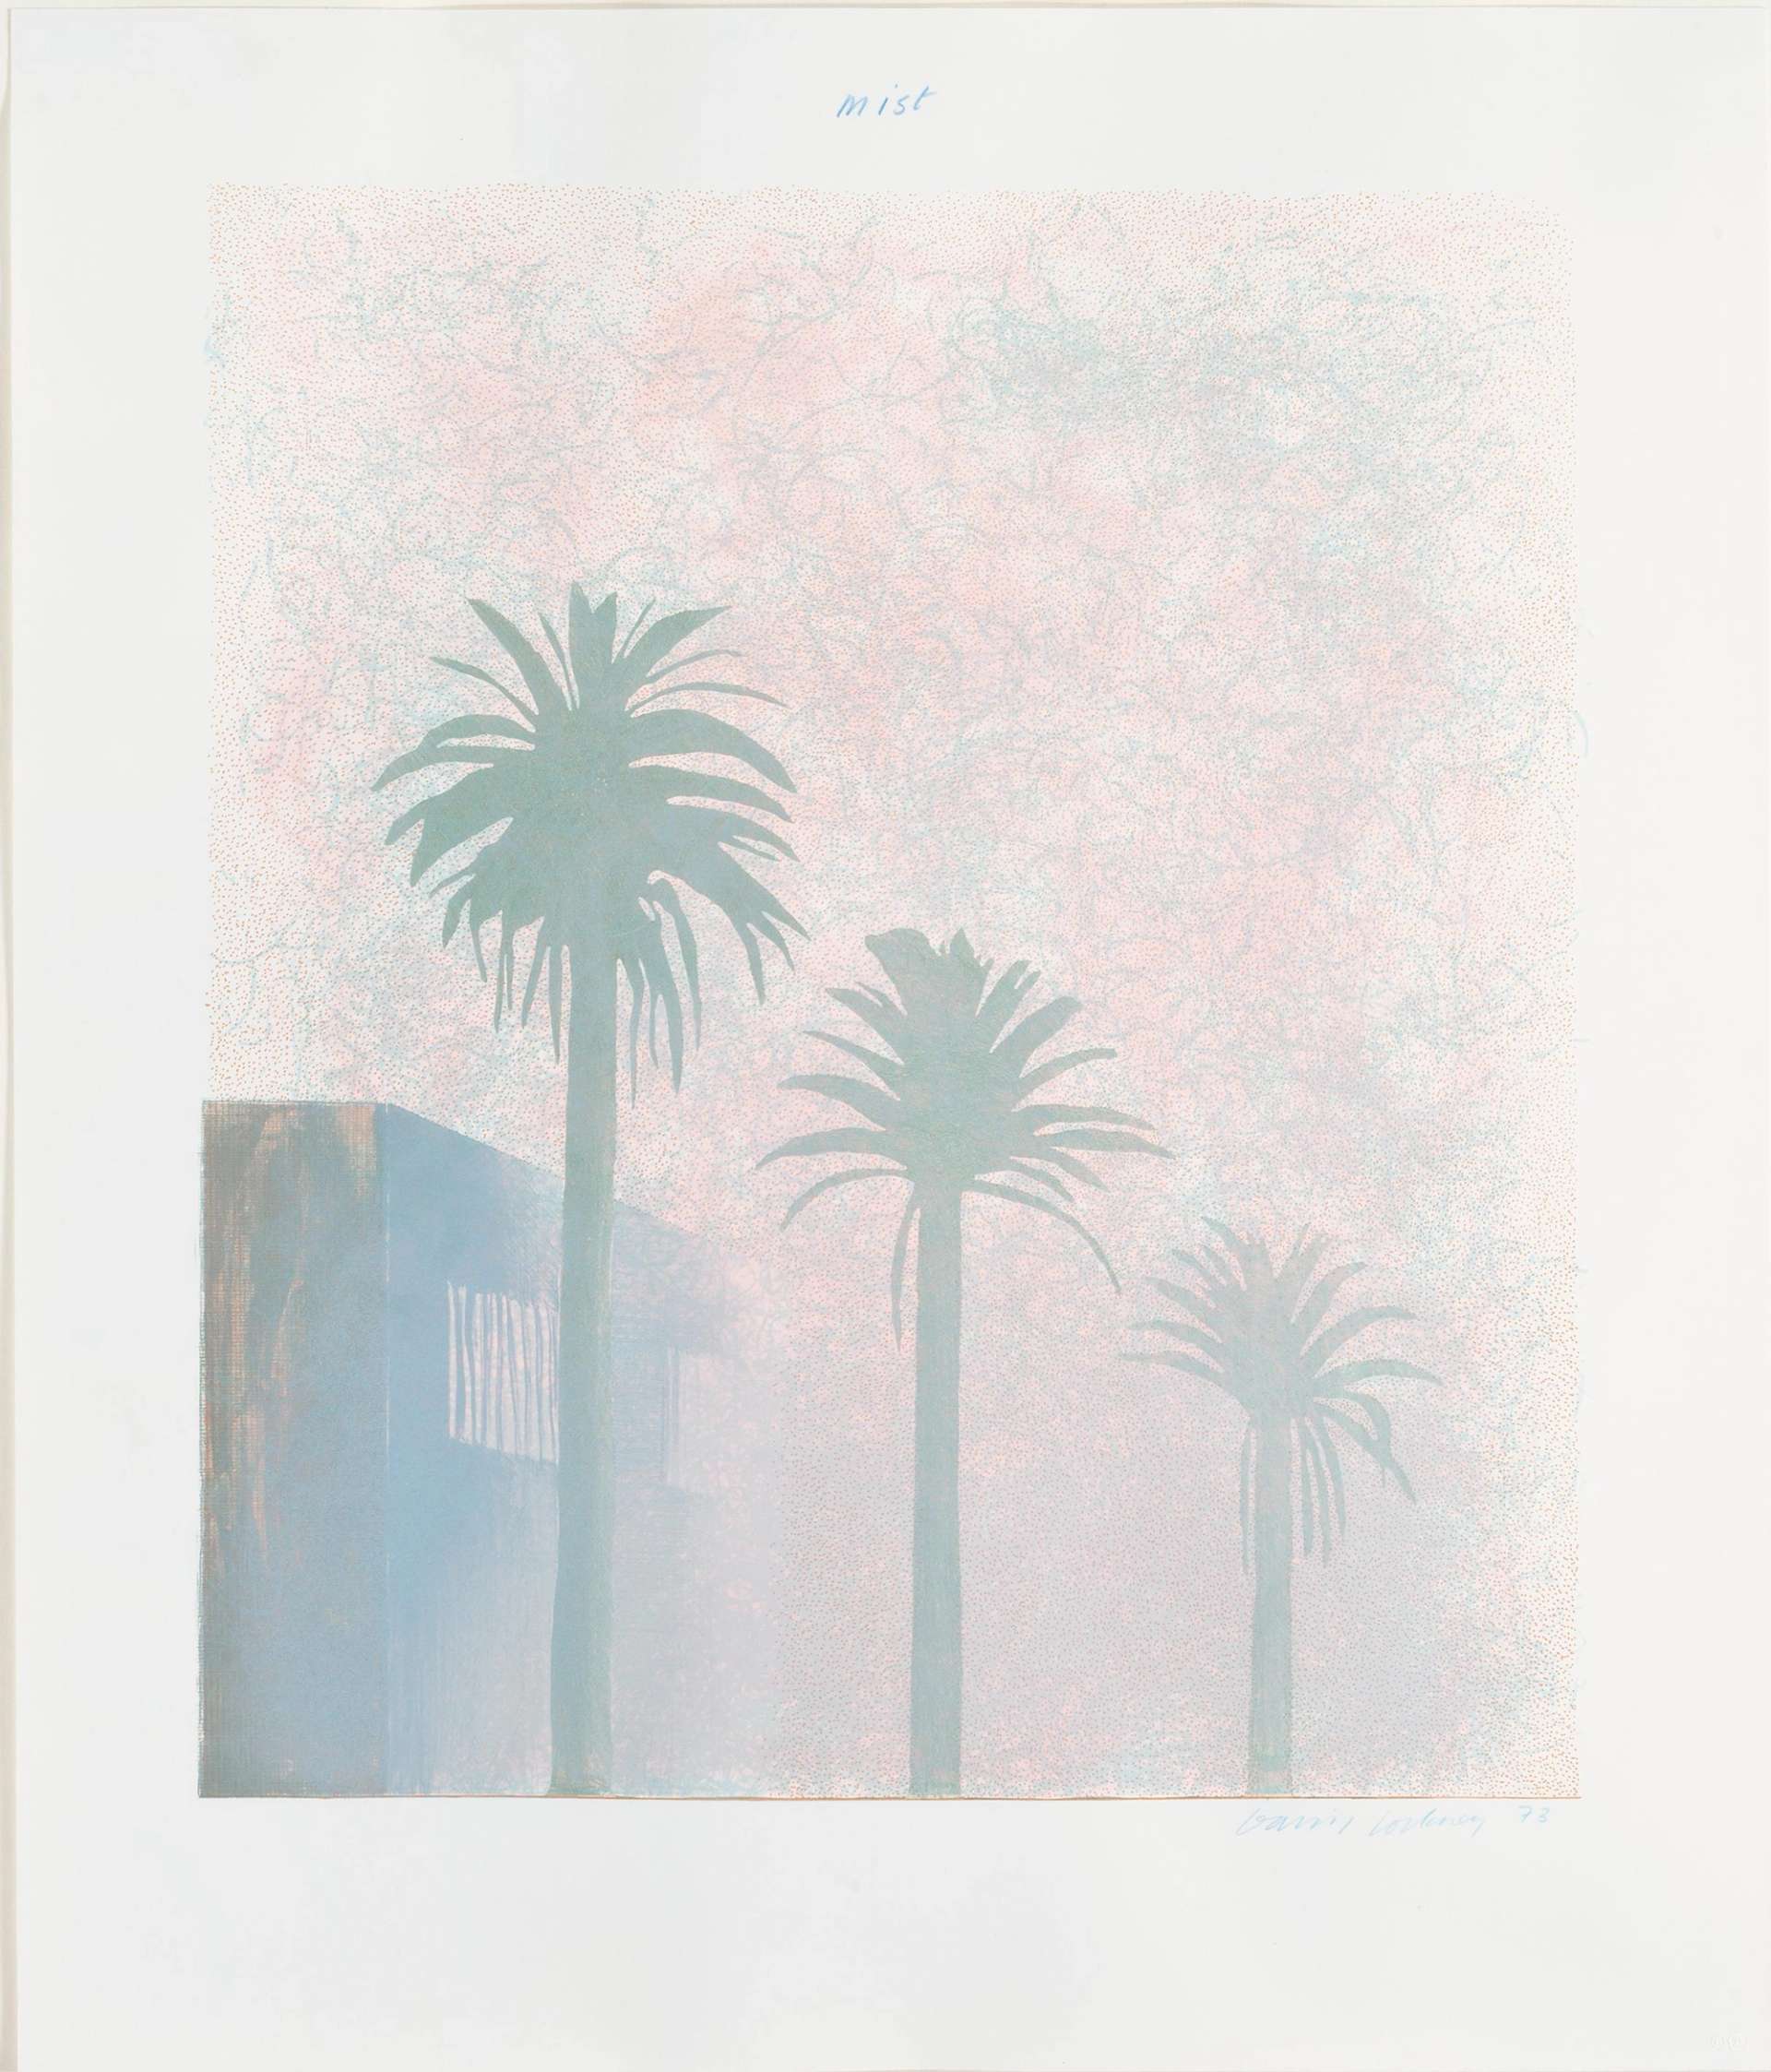 David Hockney's Mist. A print of three palm trees in front of a building, covered by mist 